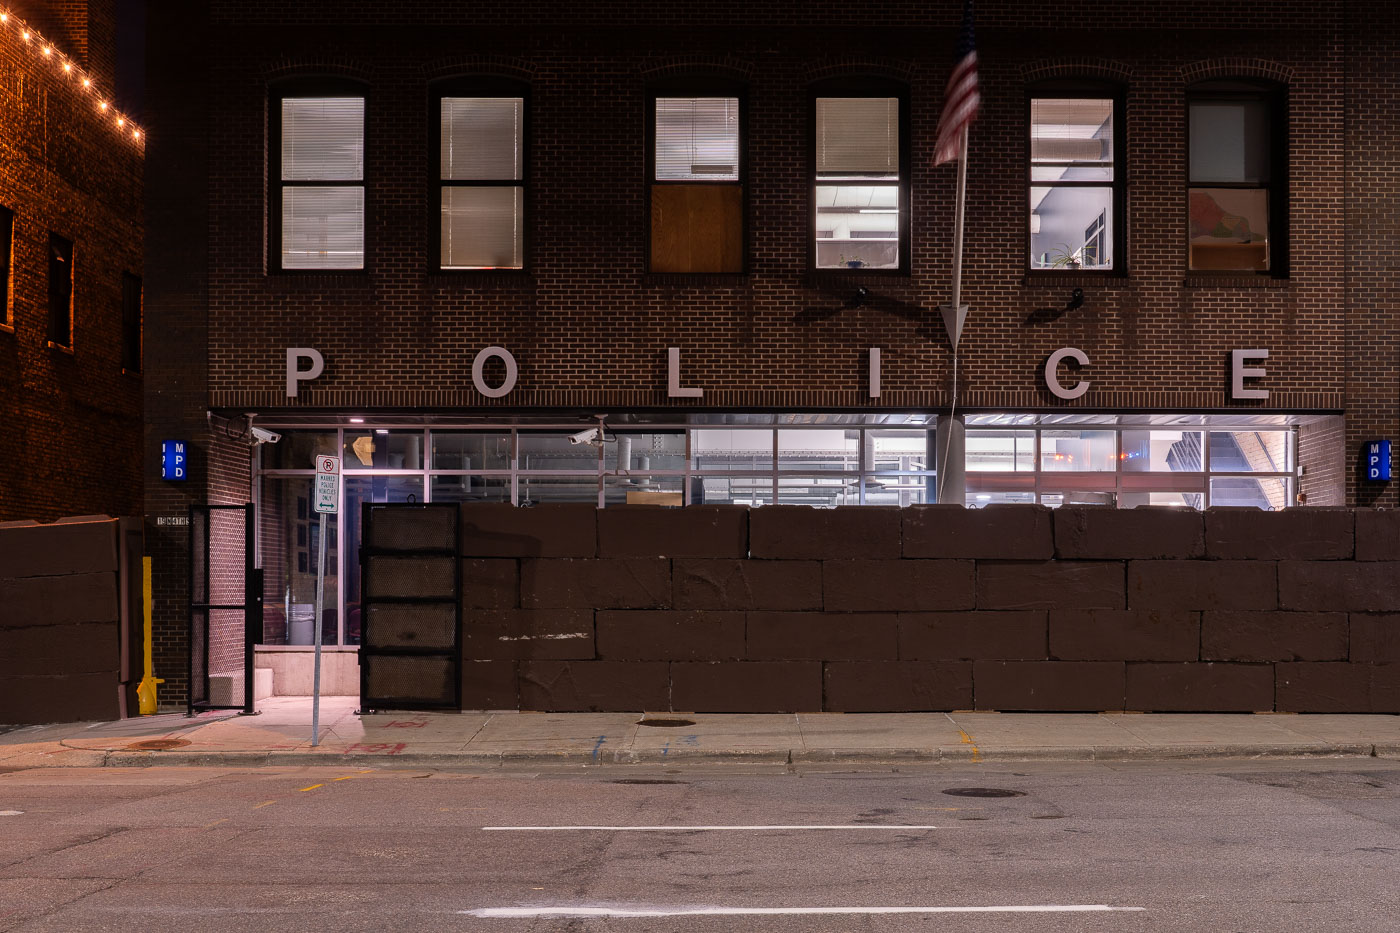 1st Precinct Police Station with painted concrete barricades